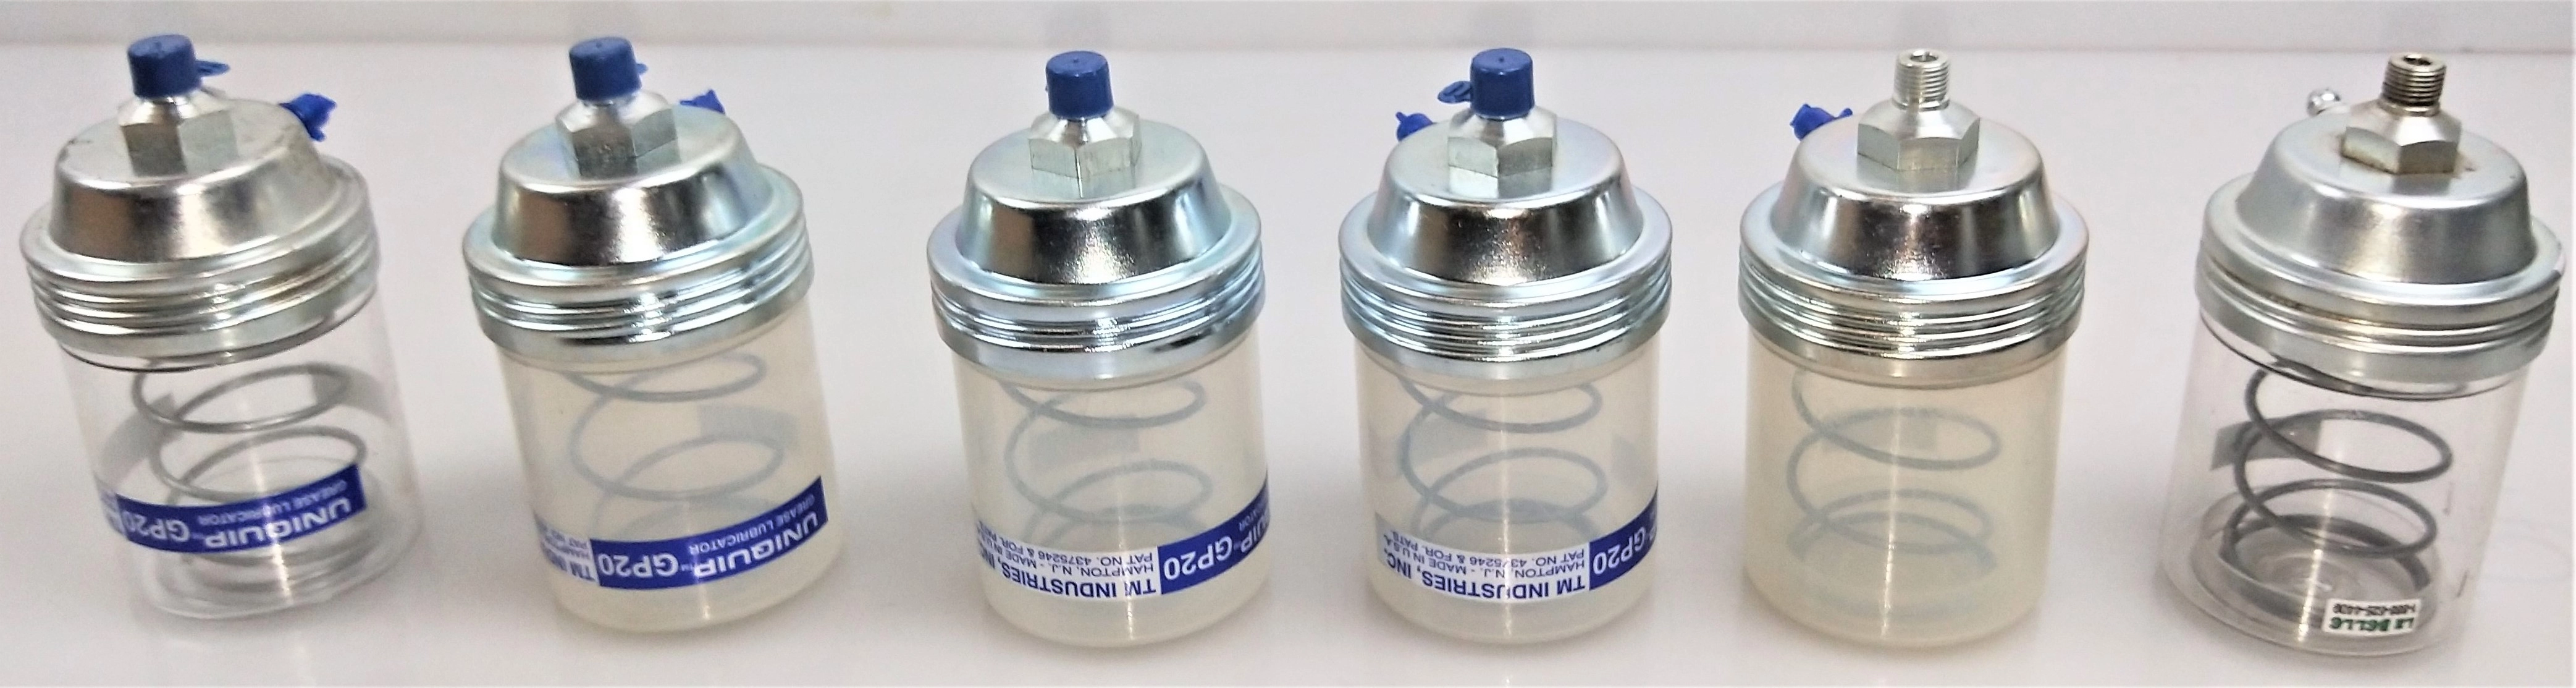 Lot of 30 Automatic Grease Lubricators - 50g and 150g Capacities